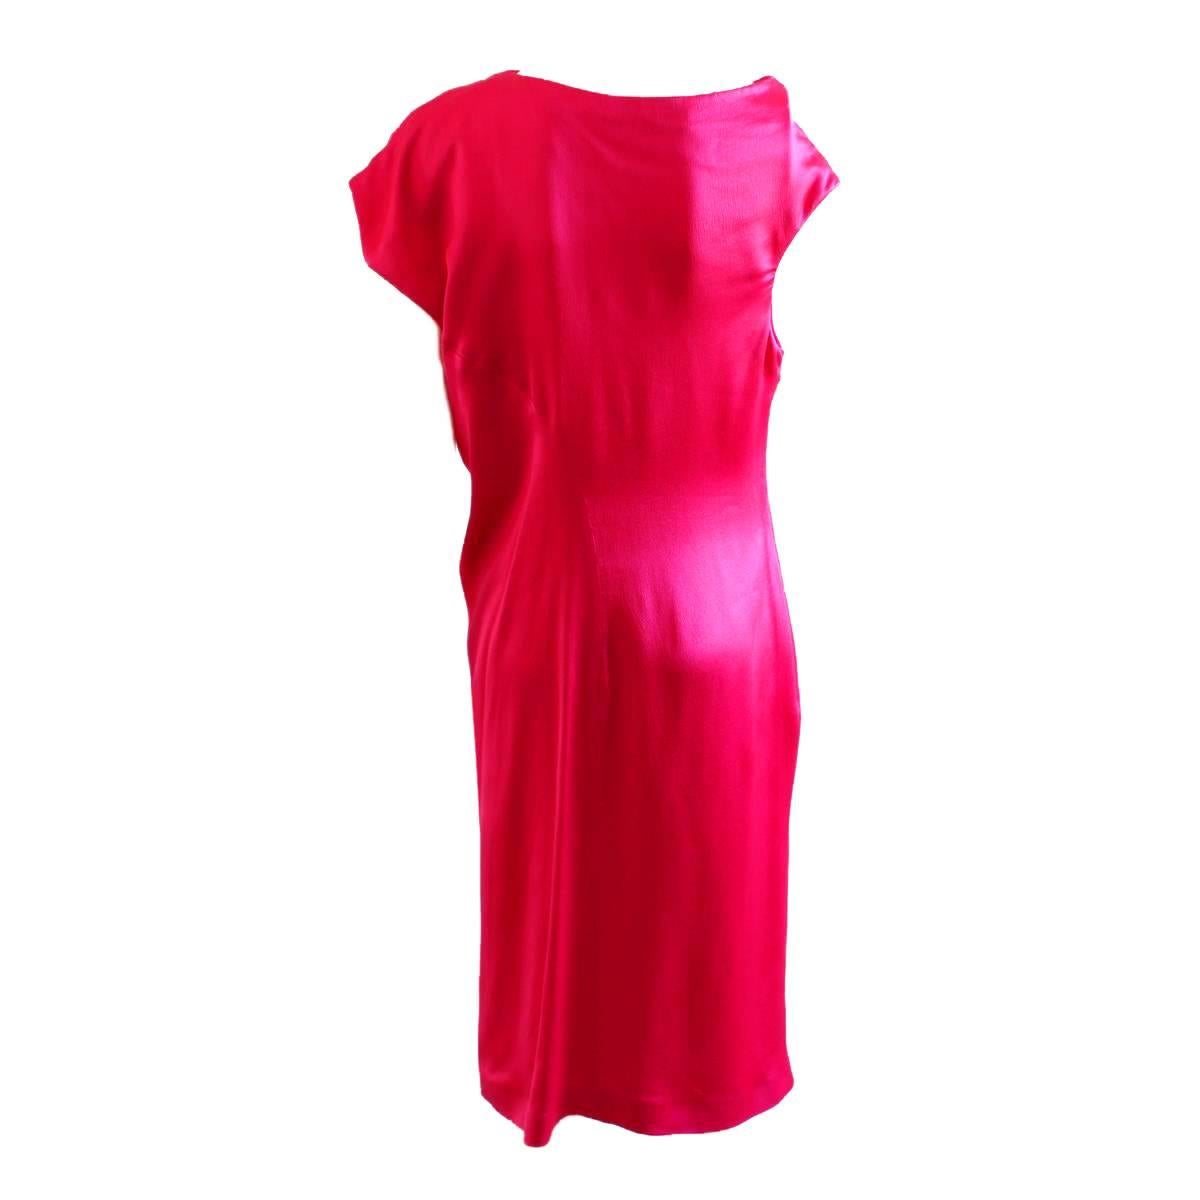 Beautiful Alexander McQueen dress
100% Silk
Fuchsia color
Sleeveless
2008 Collection
Size italian 44 (US 10)
Made in Italy
Worldwide express shipping included in the price !